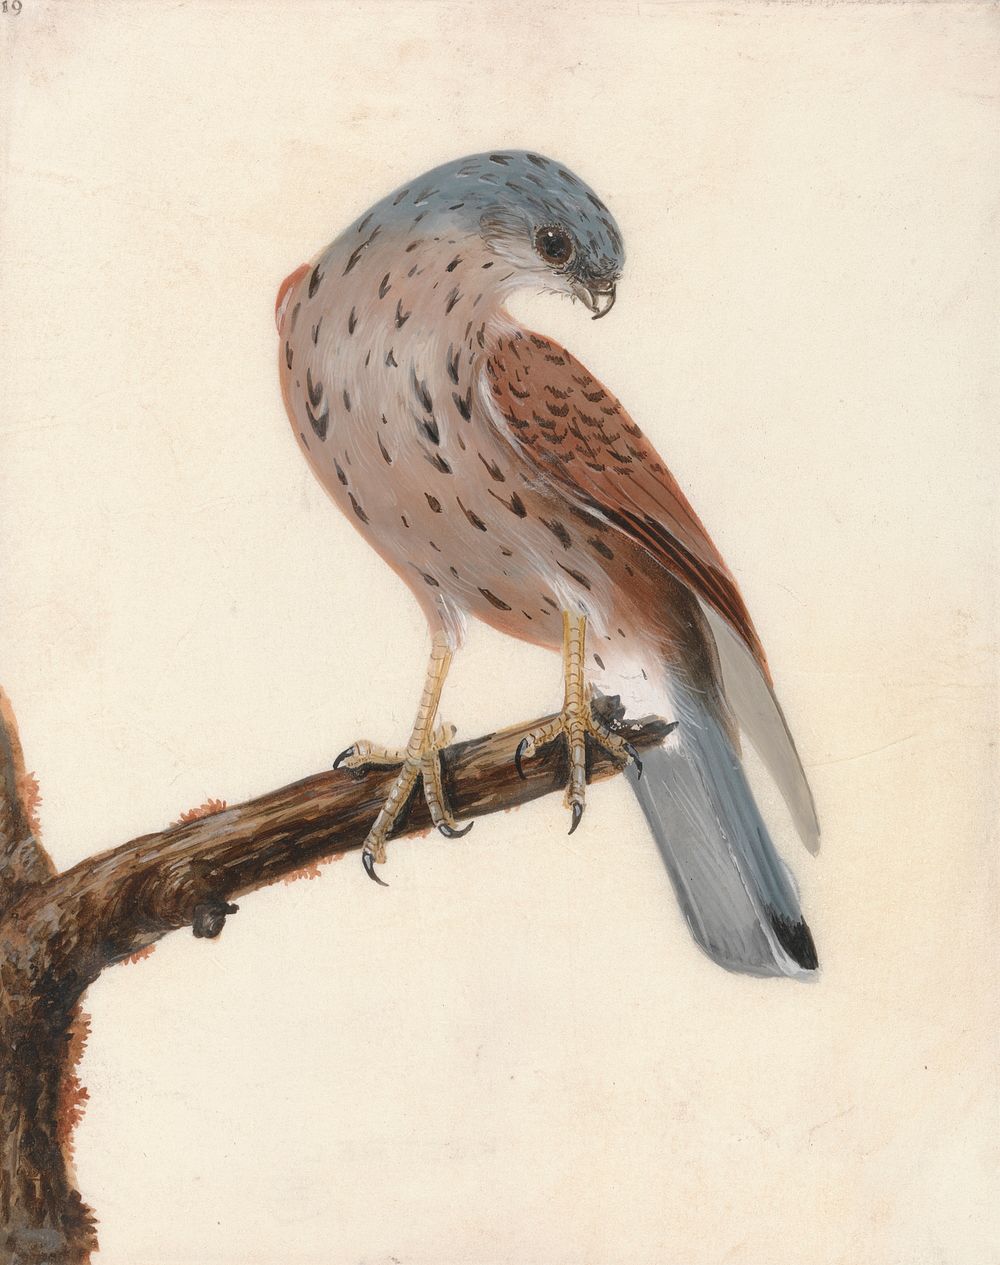  Falcon: Hen Krestel (ca. 1790) painting in high resolution by William Lewin.  